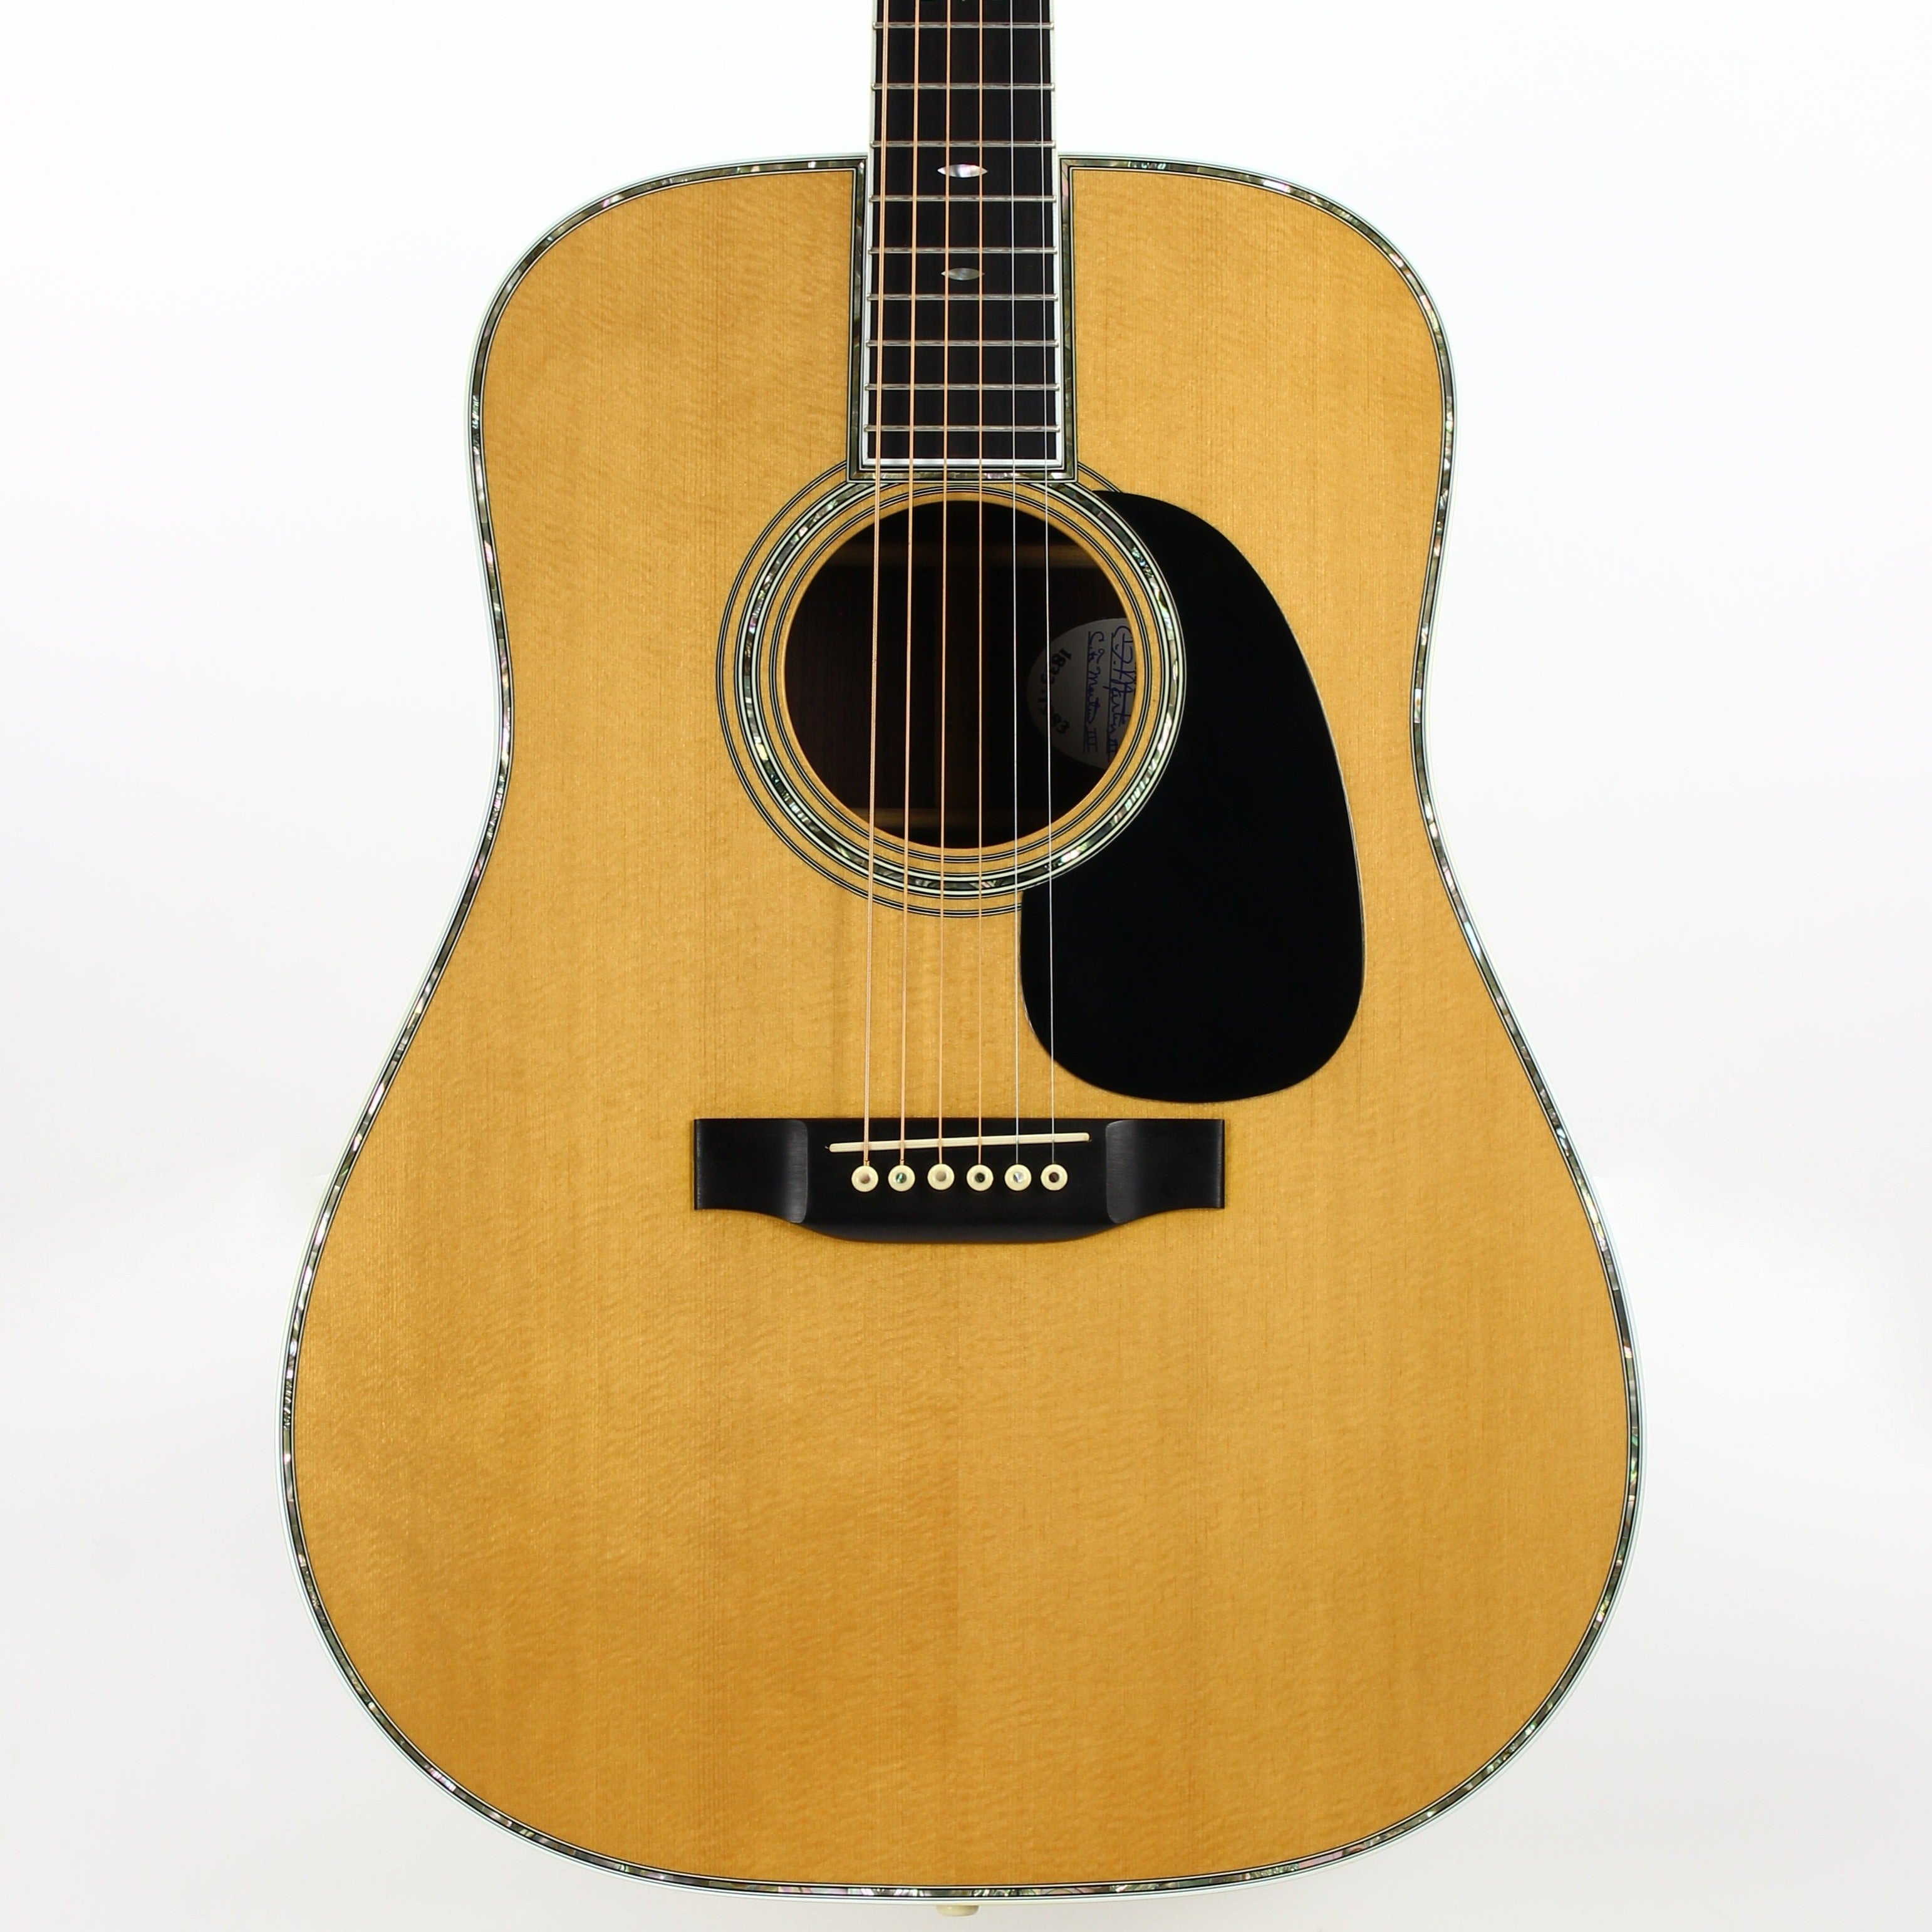 1990's Martin D-45 with abalone inlays